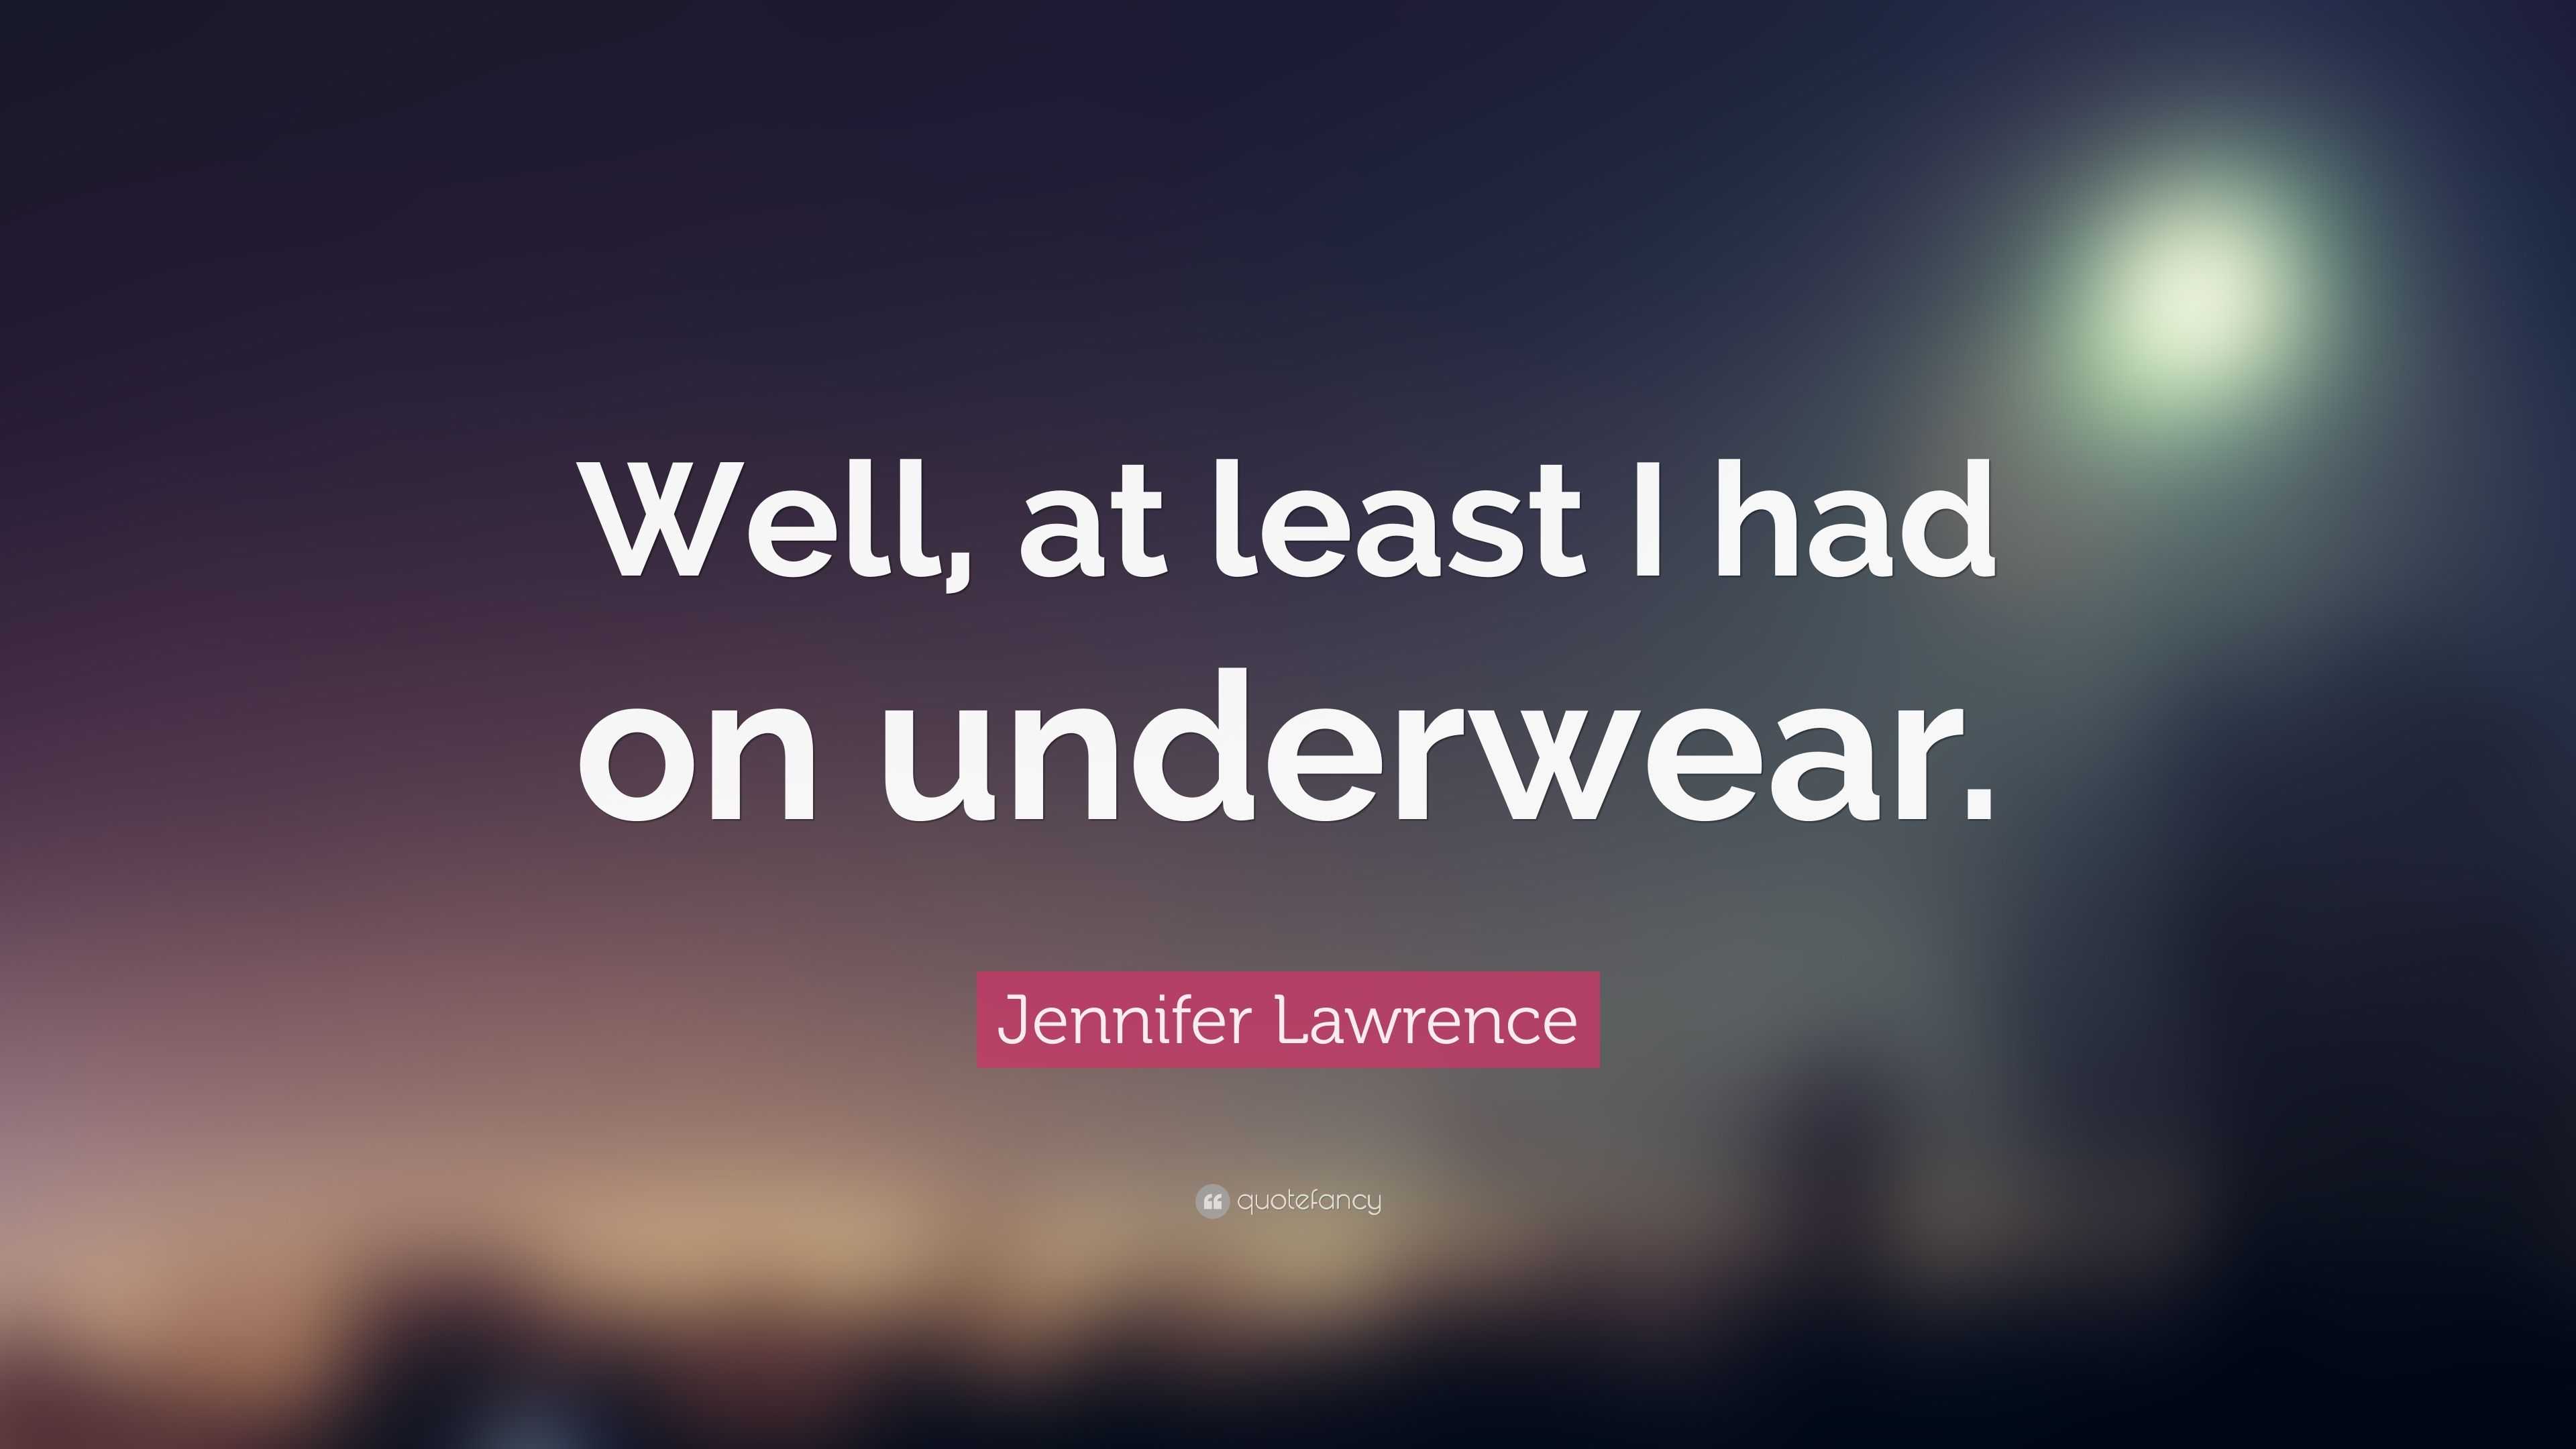 Jennifer Lawrence In Underwear and coming